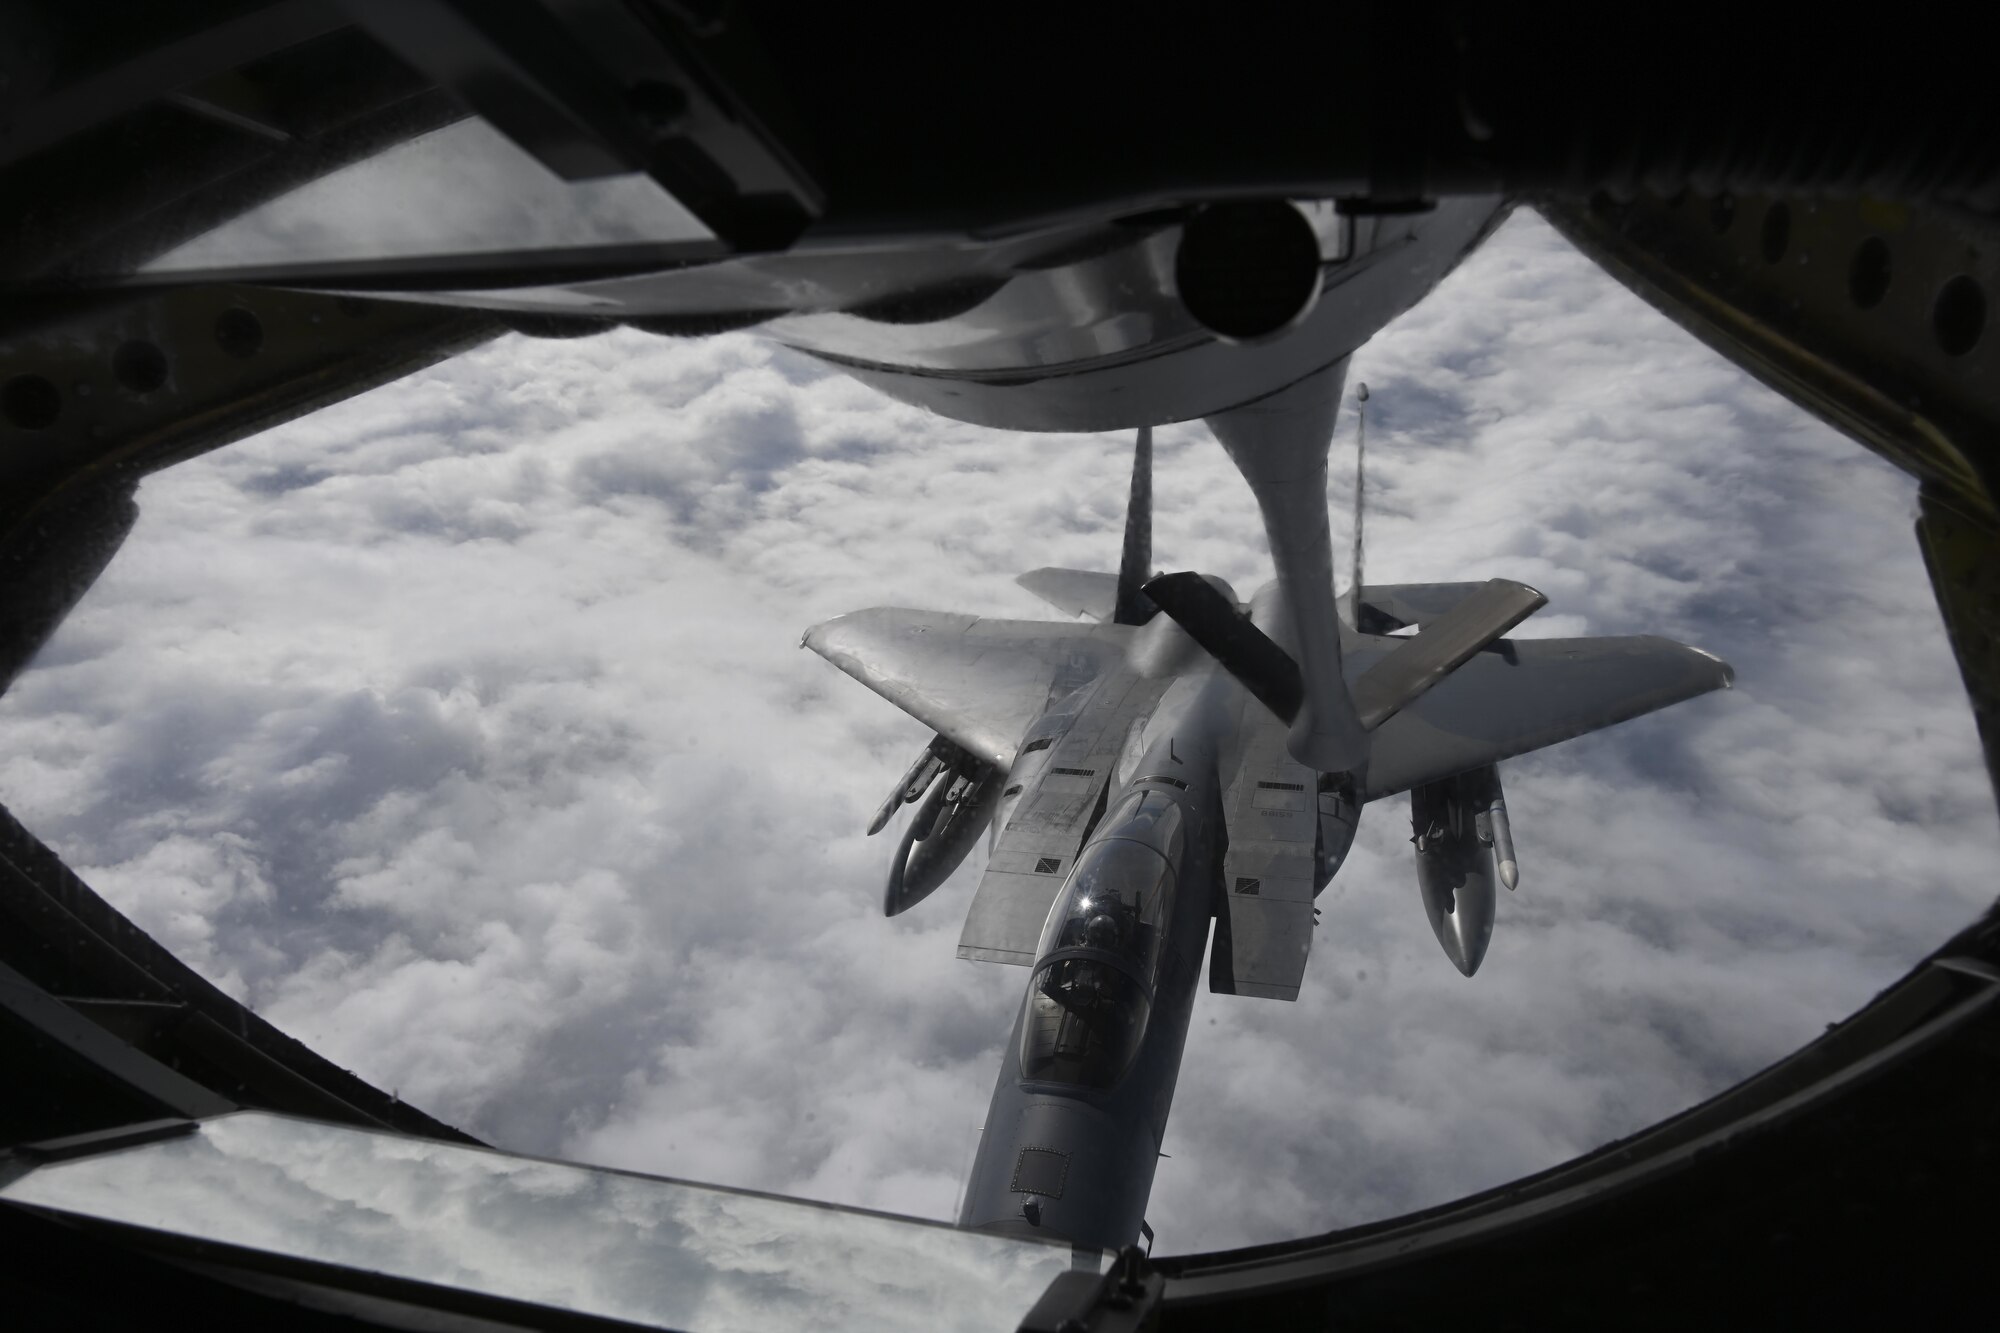 A U.S. Air Force KC-135 Stratotanker aircraft assigned to the 100th Air Refueling Wing, Royal Air Force Mildenhall, England, refuels a F-15C Eagle aircraft assigned to the 48th Fighter Wing, RAF Lakenheath, England, during exercise High Life over the North Sea, Sept. 15, 2021. The complexity of the European continent and the tyranny of proximity makes operating with allies and partners throughout Europe an imperative. (U.S. Air Force photo by Senior Airman Joseph Barron)